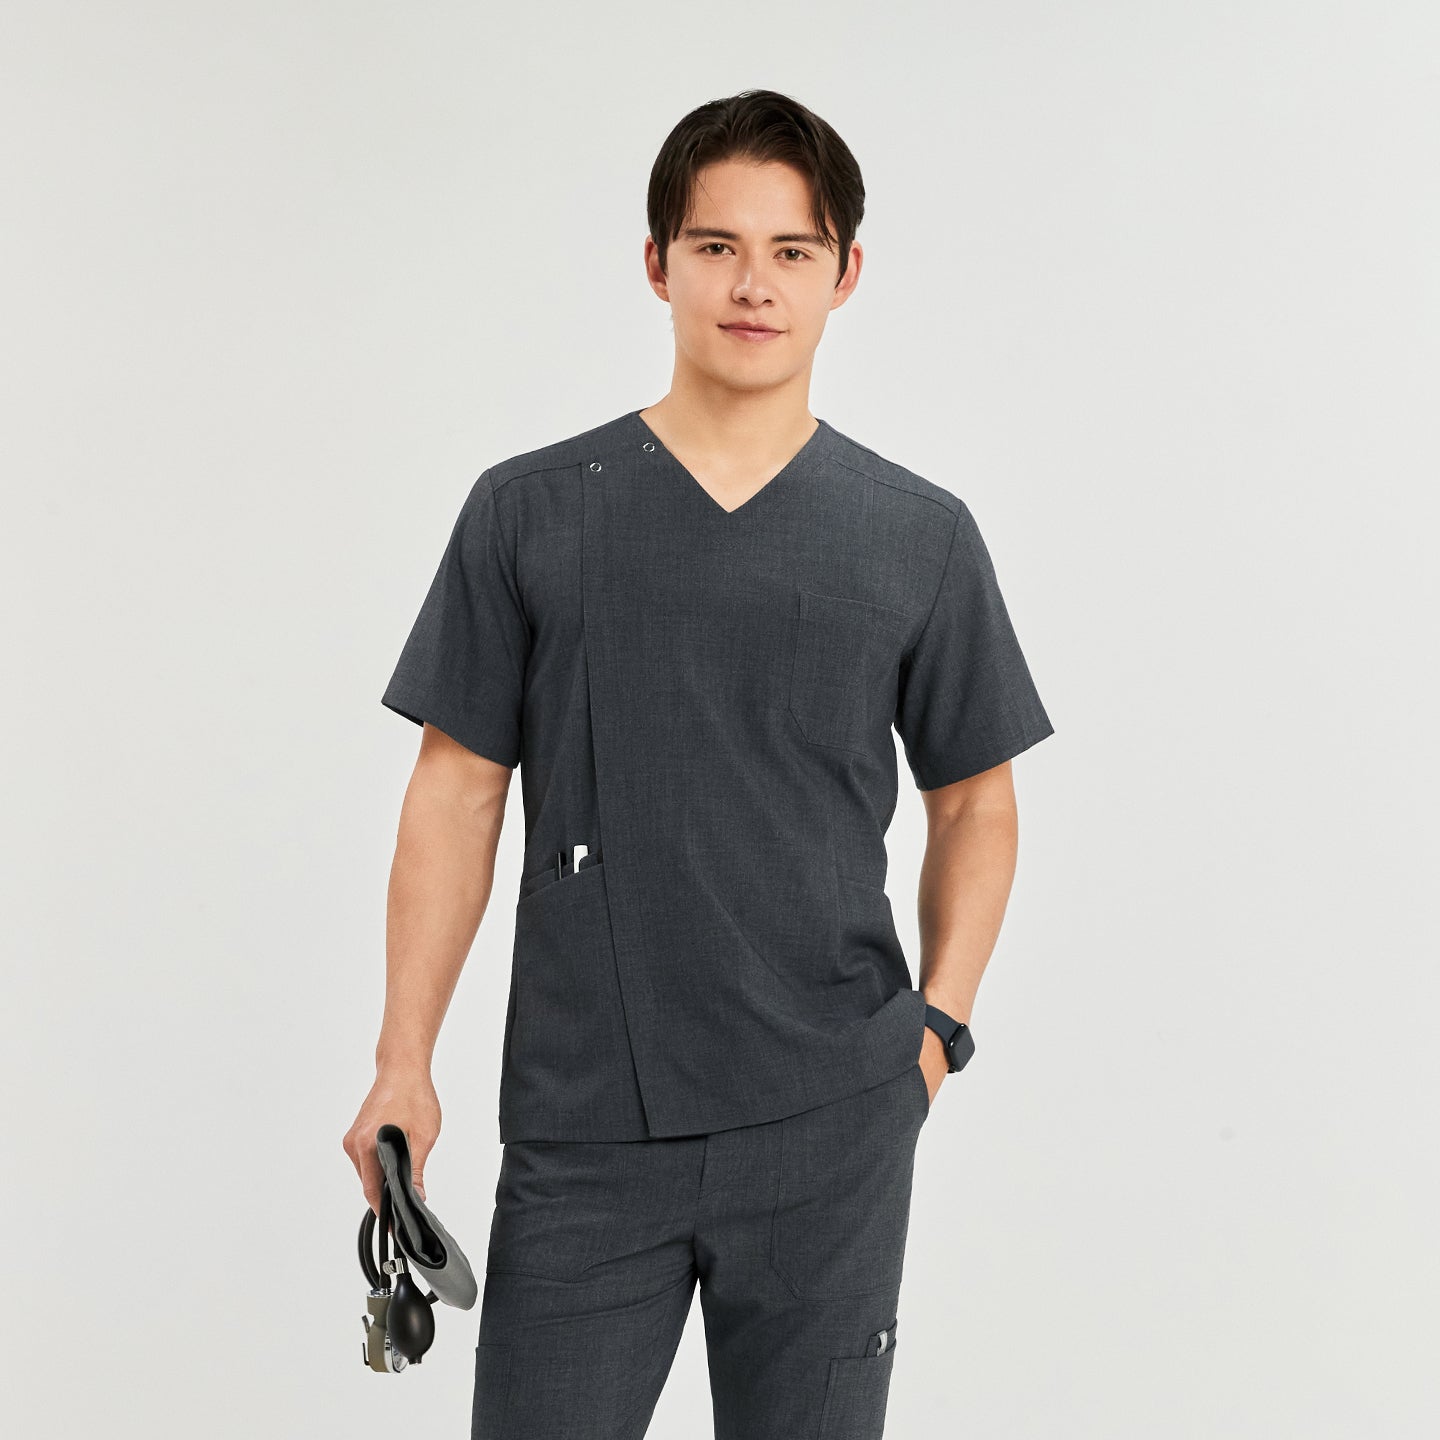 Man wearing a front zipper scrub top with matching cargo pants, holding a blood pressure monitor, one hand in pocket,Charcoal Gray